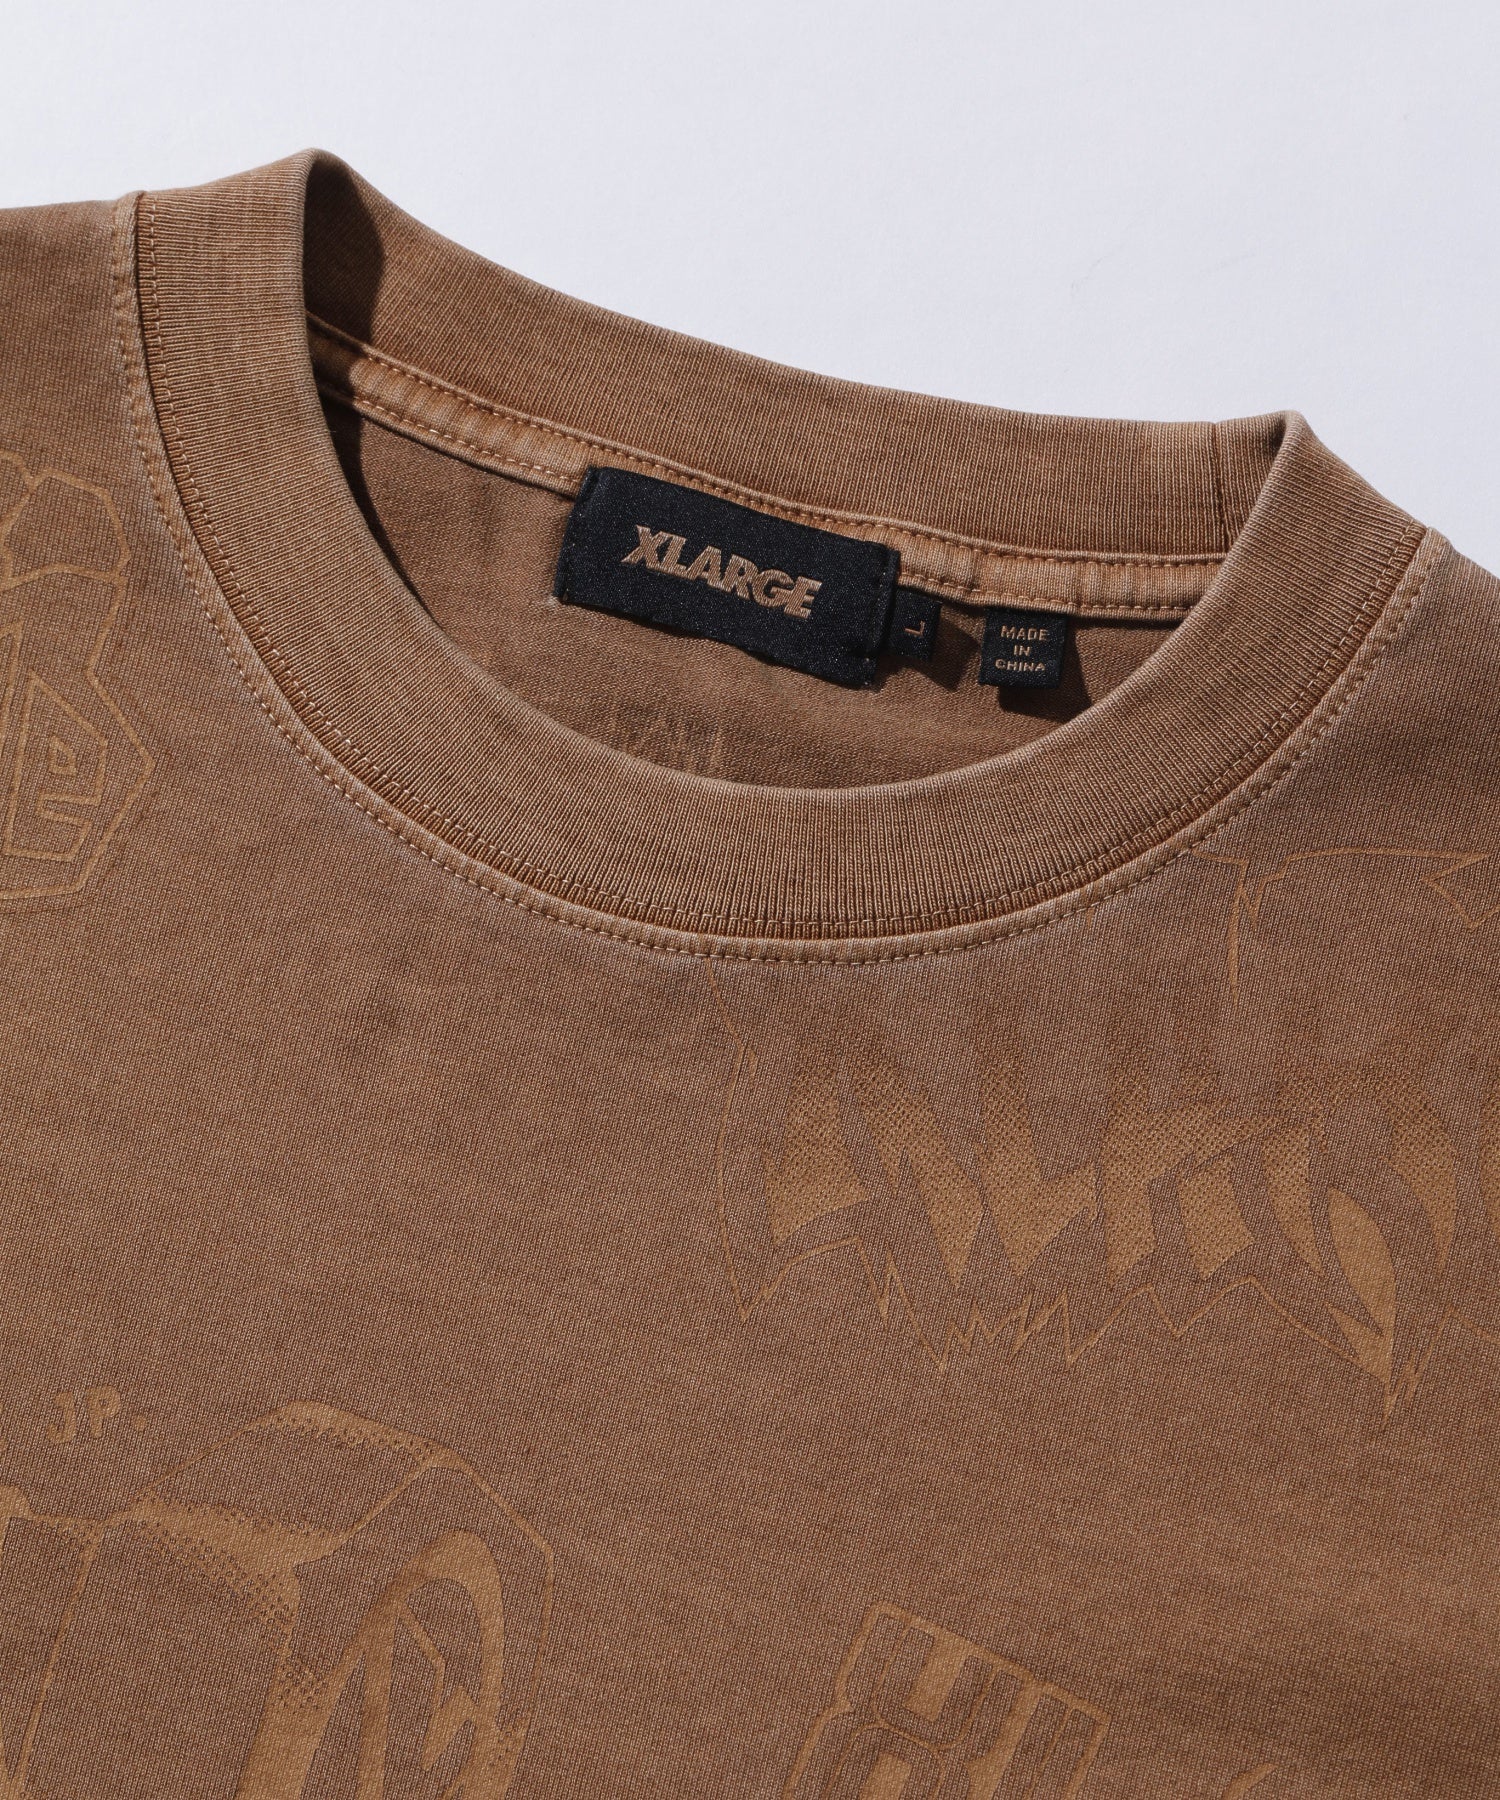 ALLOVER PRINTED S/S POCKET TEE